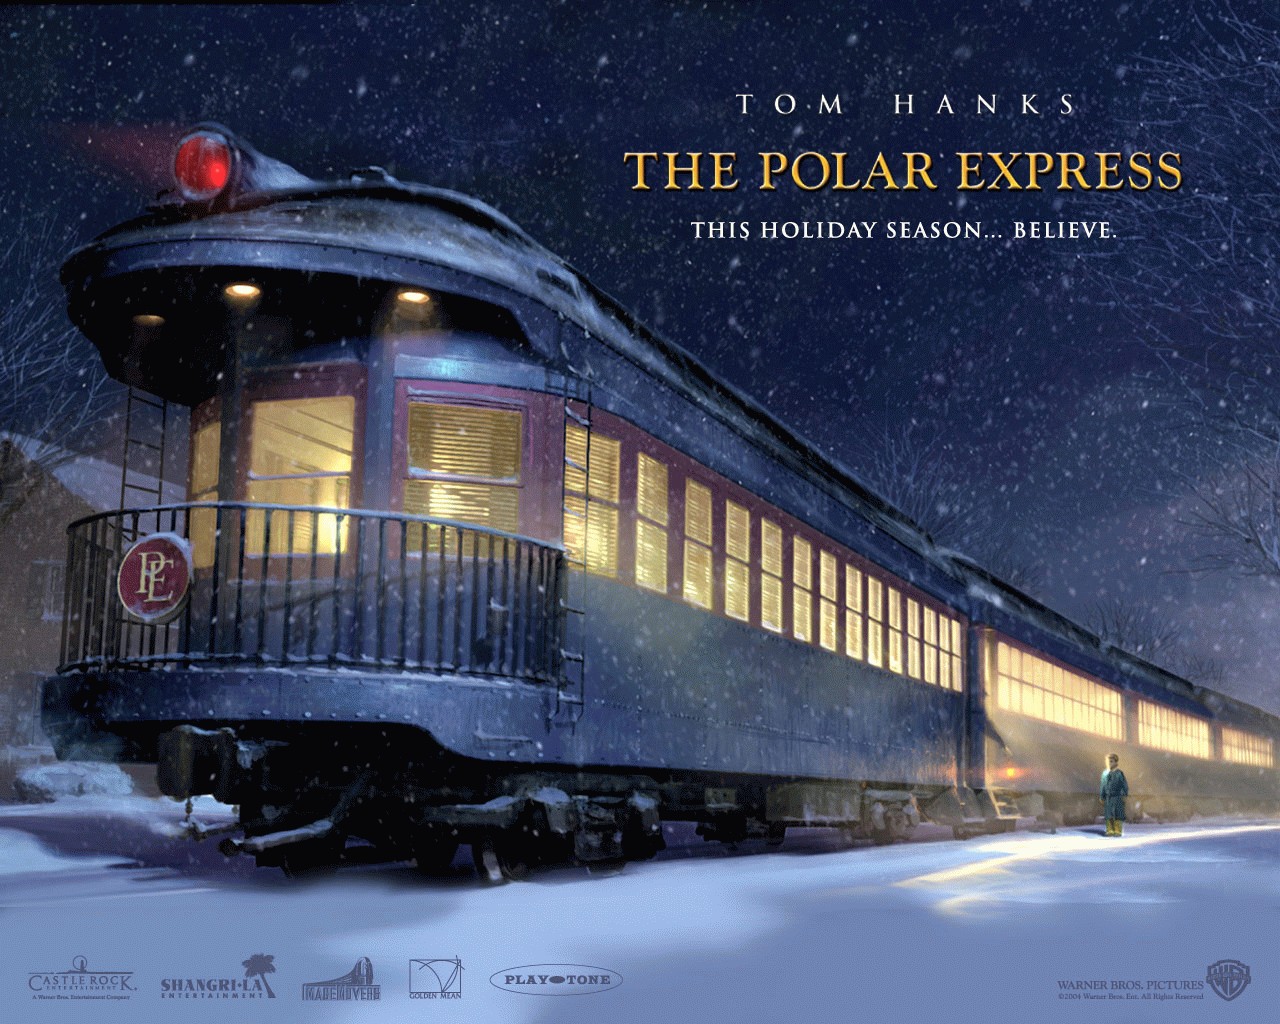 The Polar Express Tamil Dupped English Movie Online Watch 